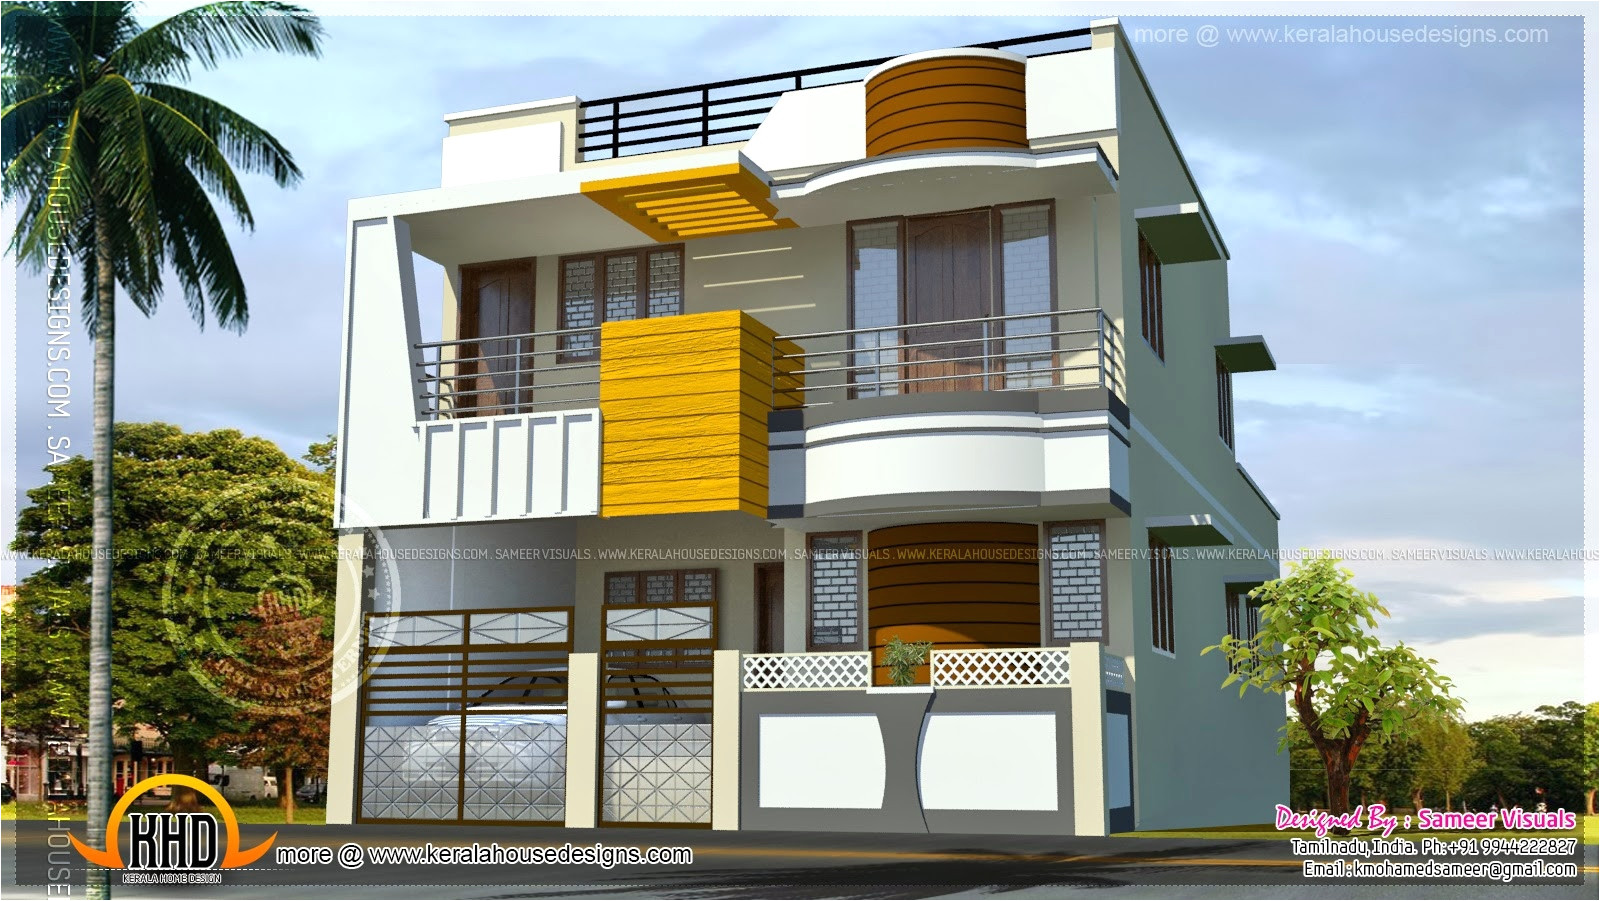 house design indian style plan and elevation lovely outstanding